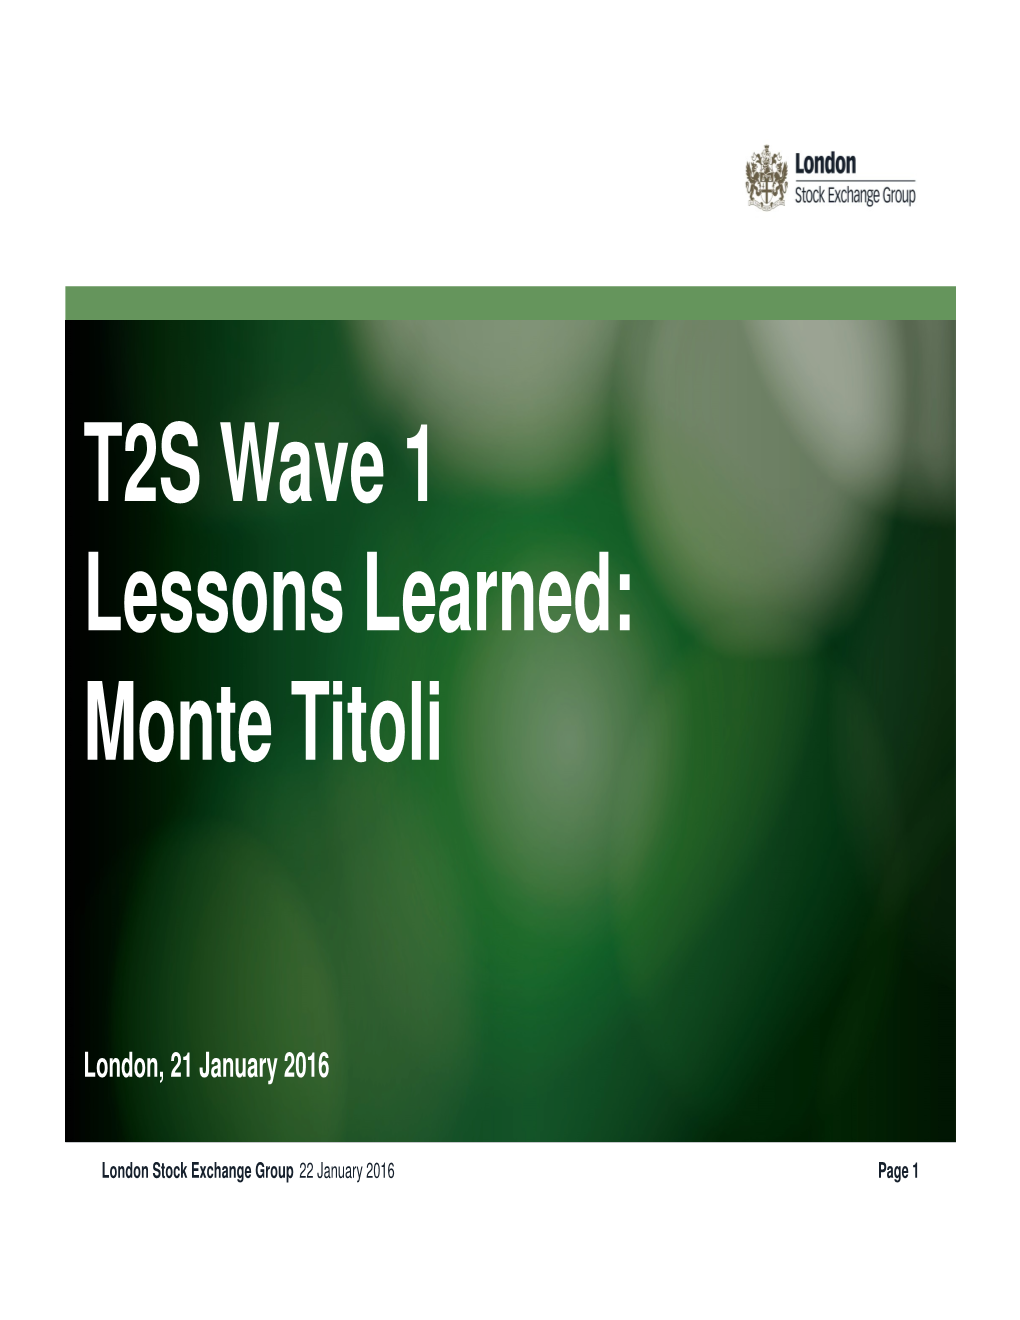 T2S Wave 1 Lessons Learned: Monte Titoli